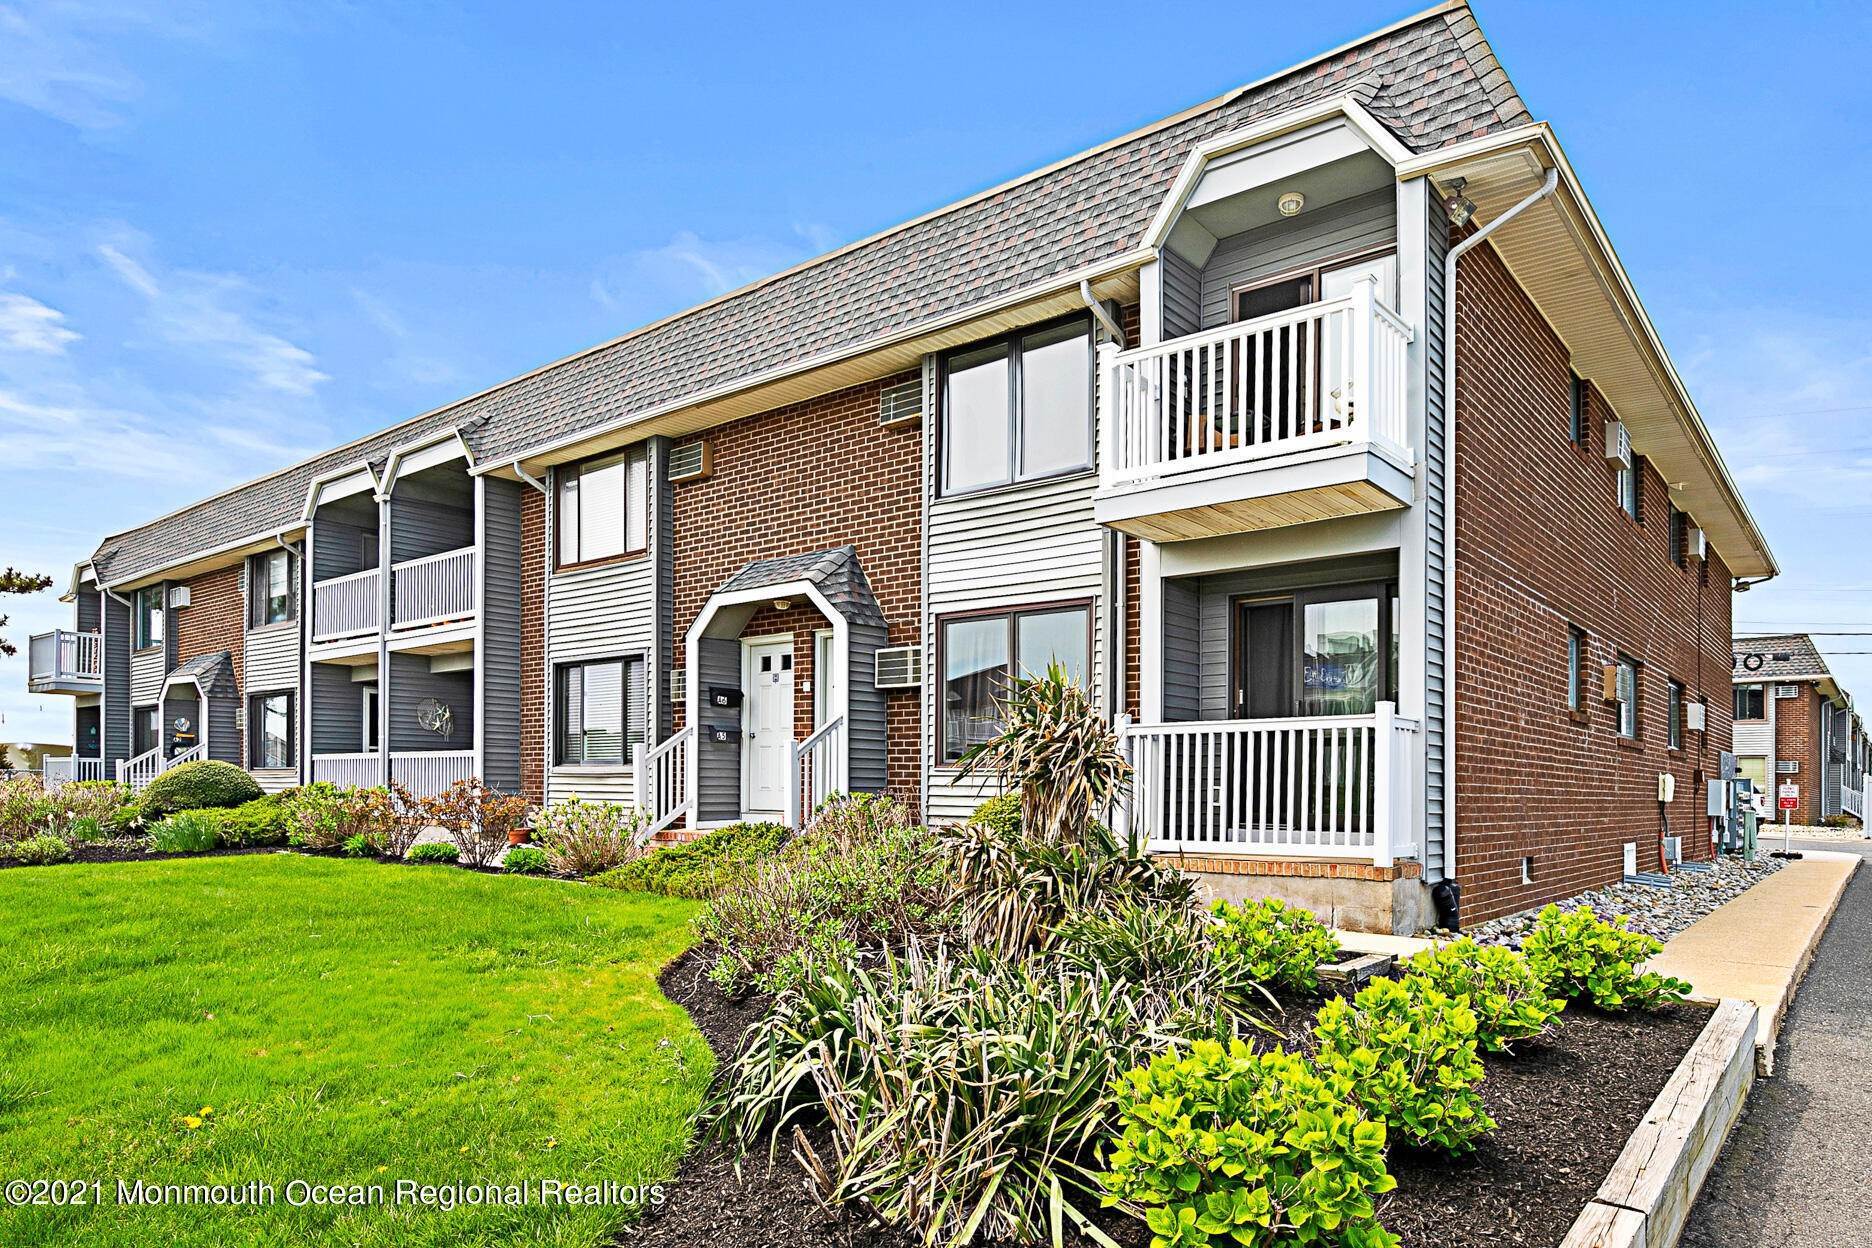 Apartments at 1382 Ocean Avenue Sea Bright, New Jersey 07760 United States